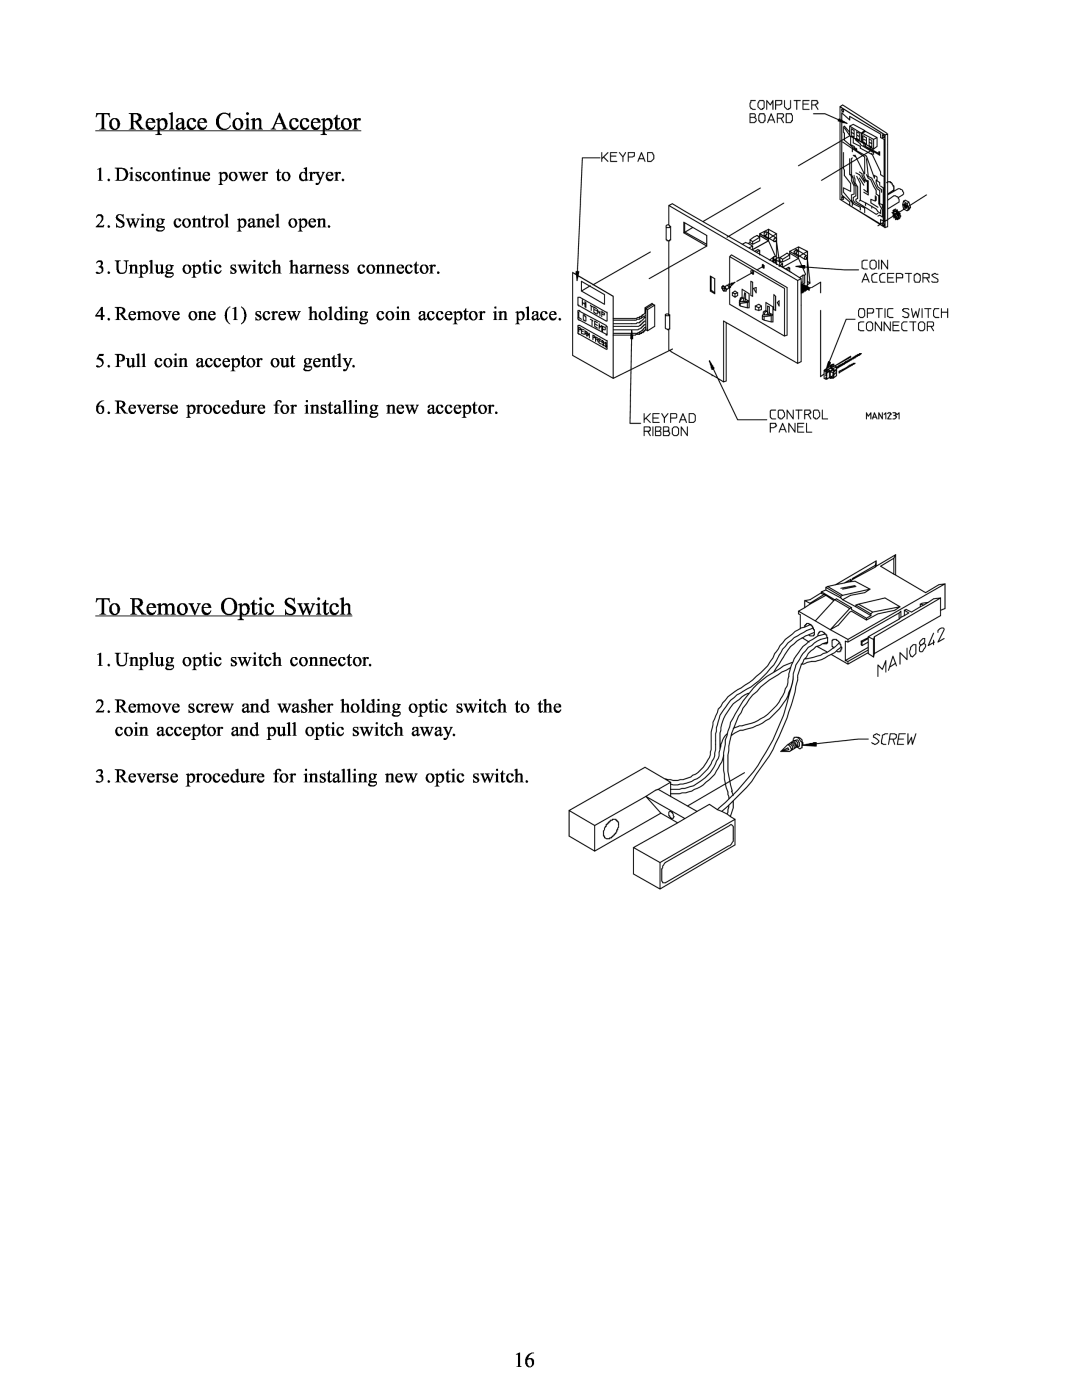 American Dryer Corp WDA-385 service manual To Replace Coin Acceptor, To Remove Optic Switch 